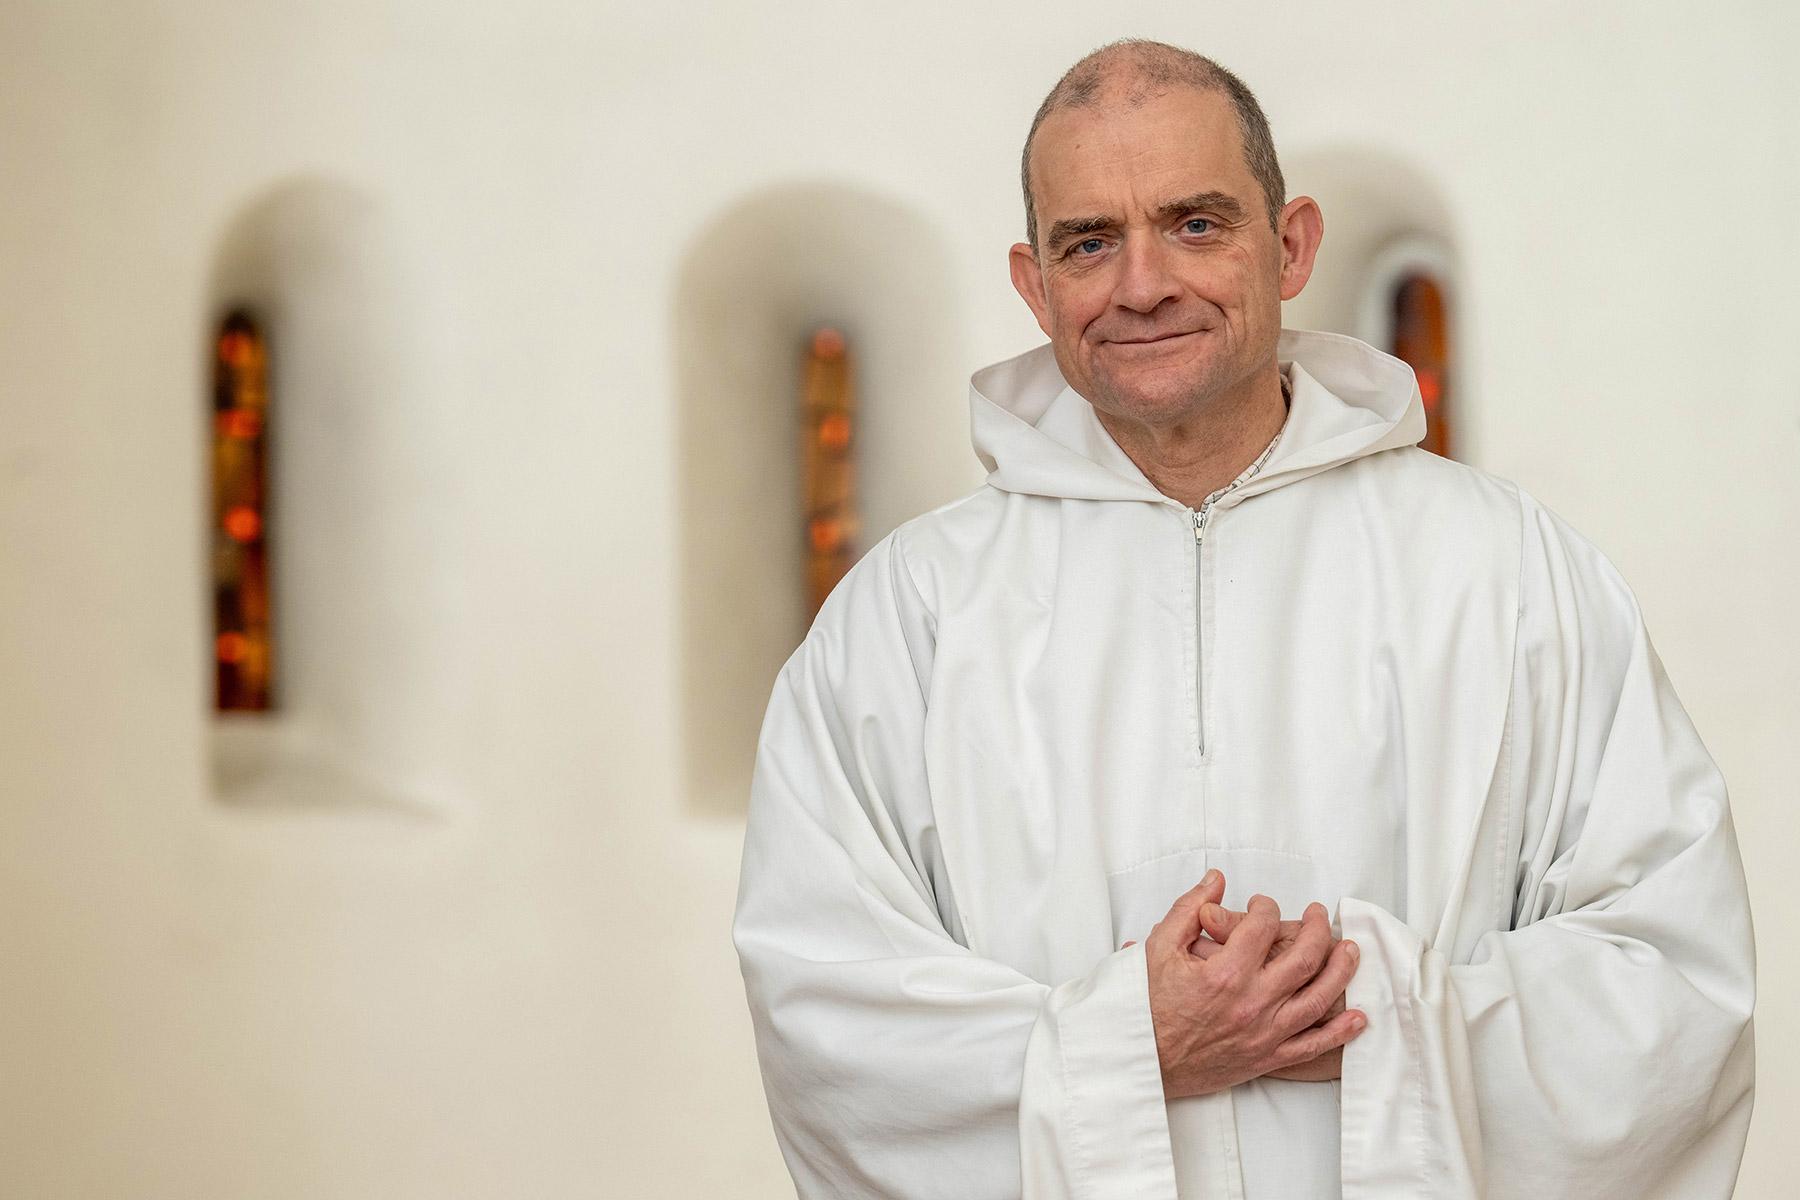 Brother Matthew, civil name Andrew Thorpe, comes from England and has an Anglican background. Photo: Atéliers et Presses de Taizé/ Tamino Petelinsek